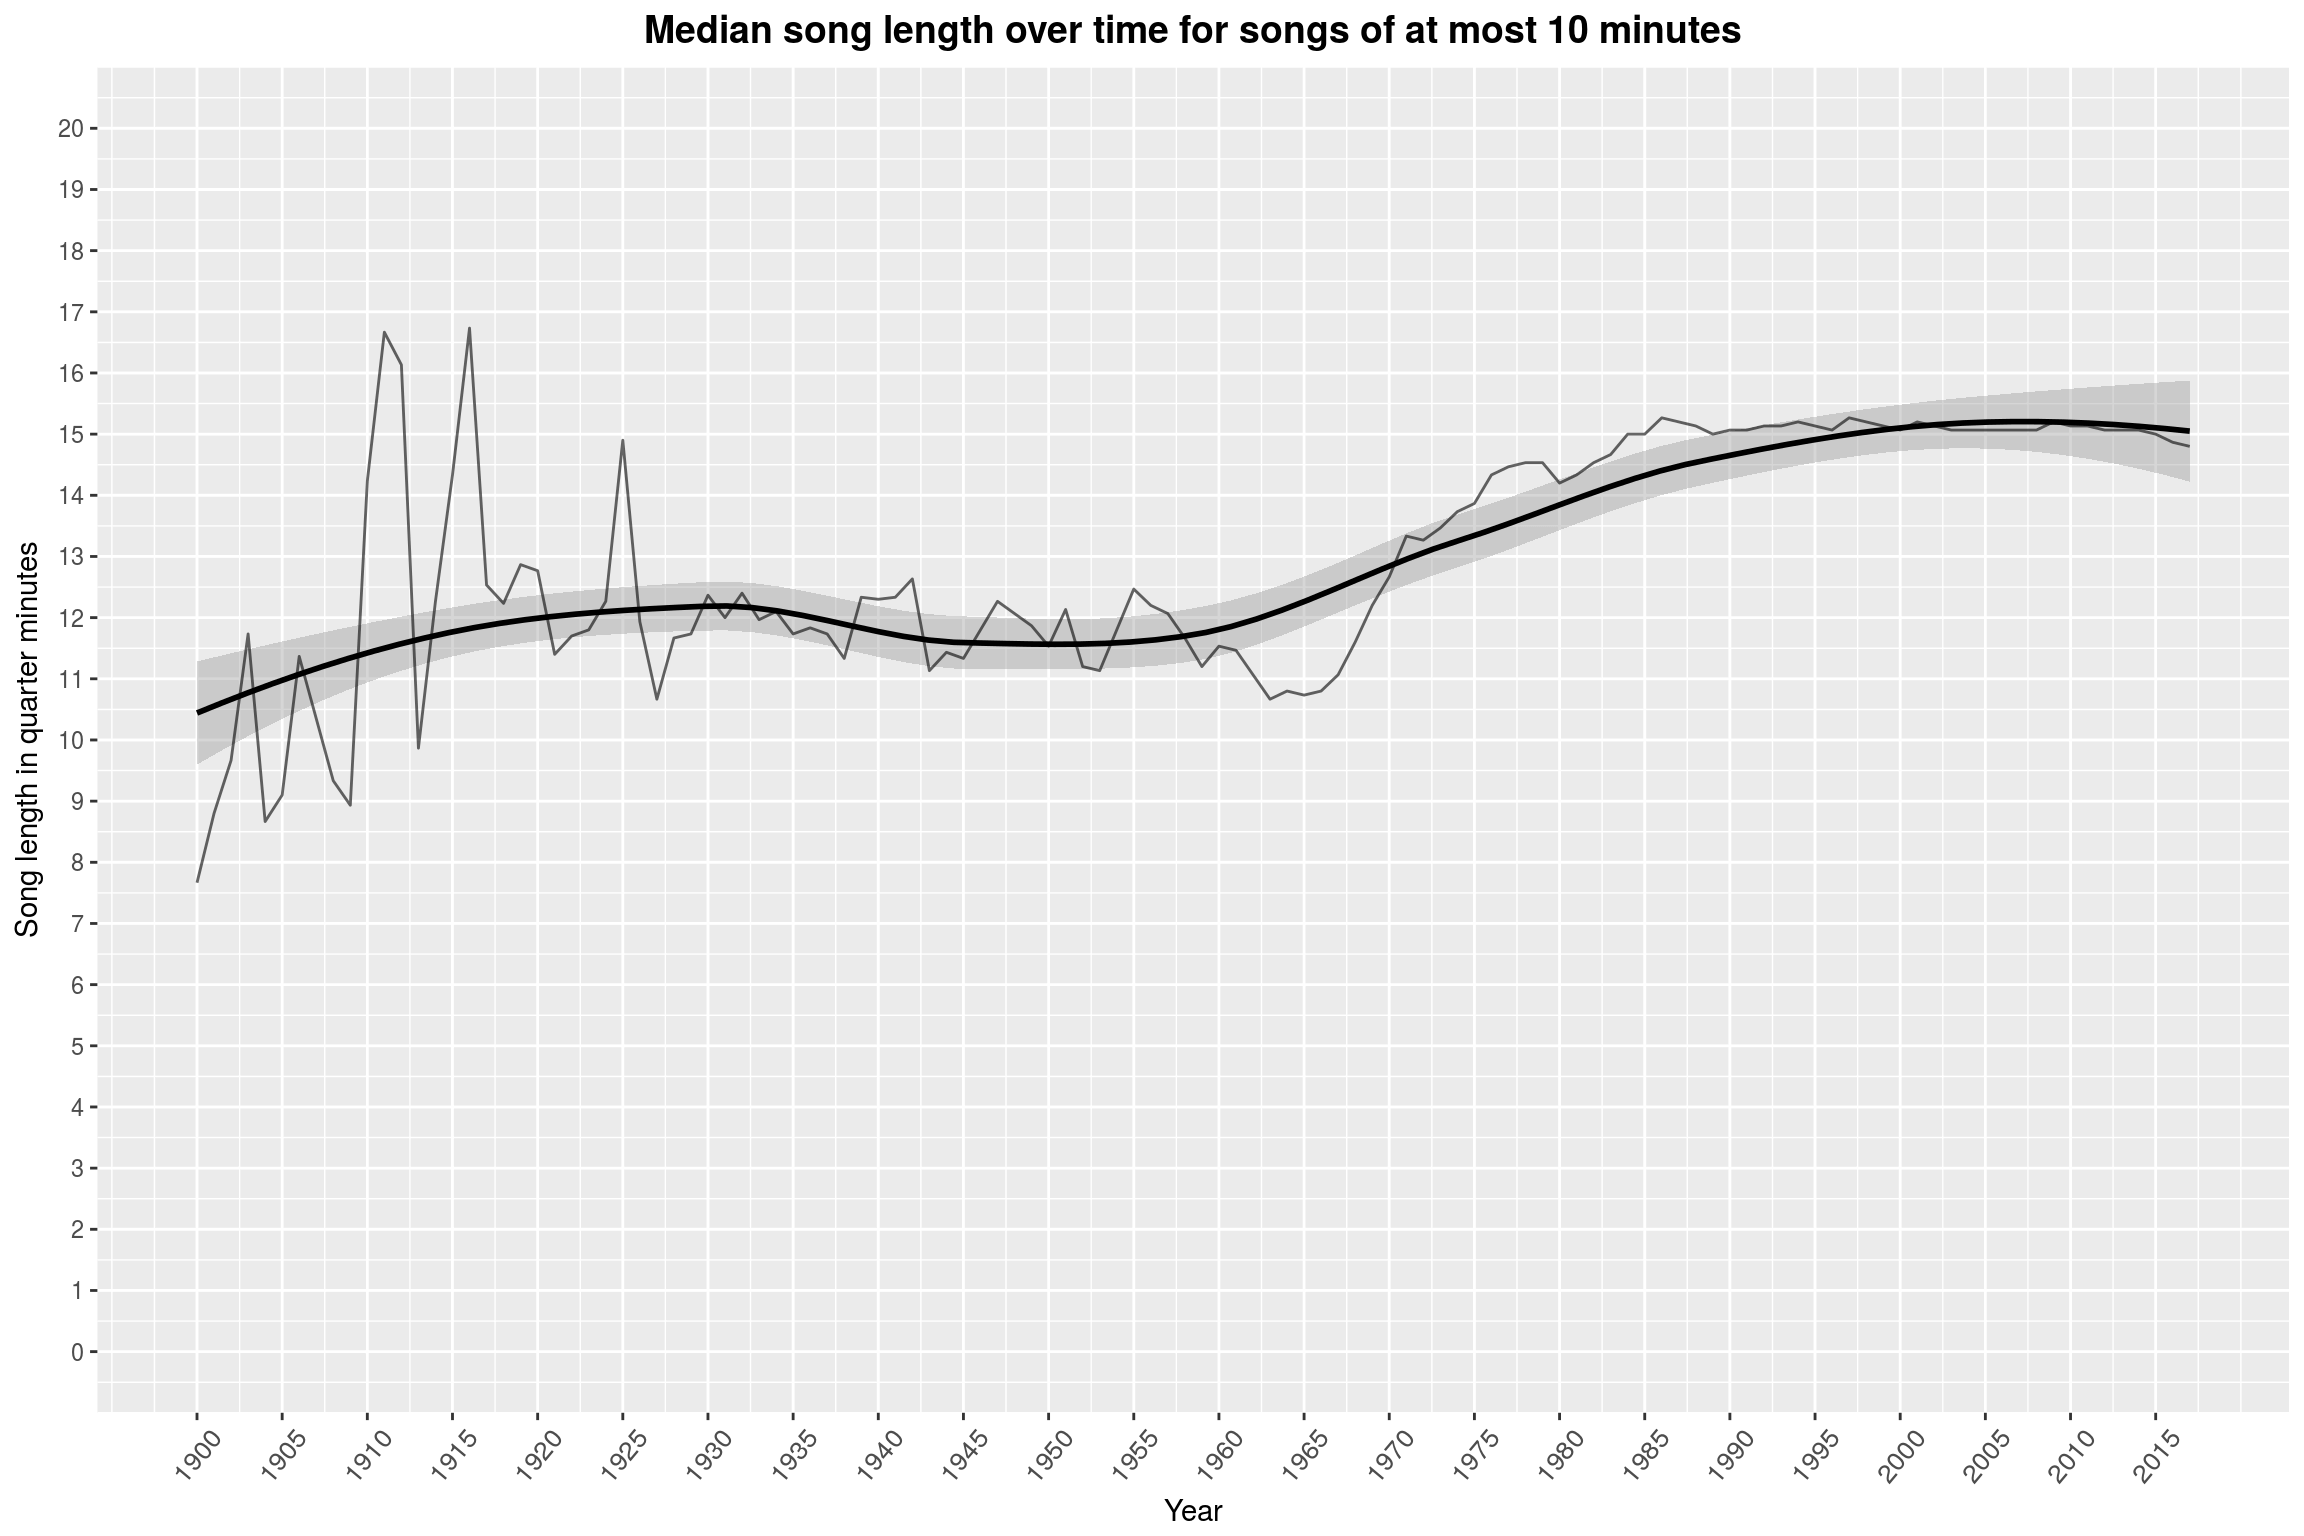 Median song length over time for songs of at most 10 minutes